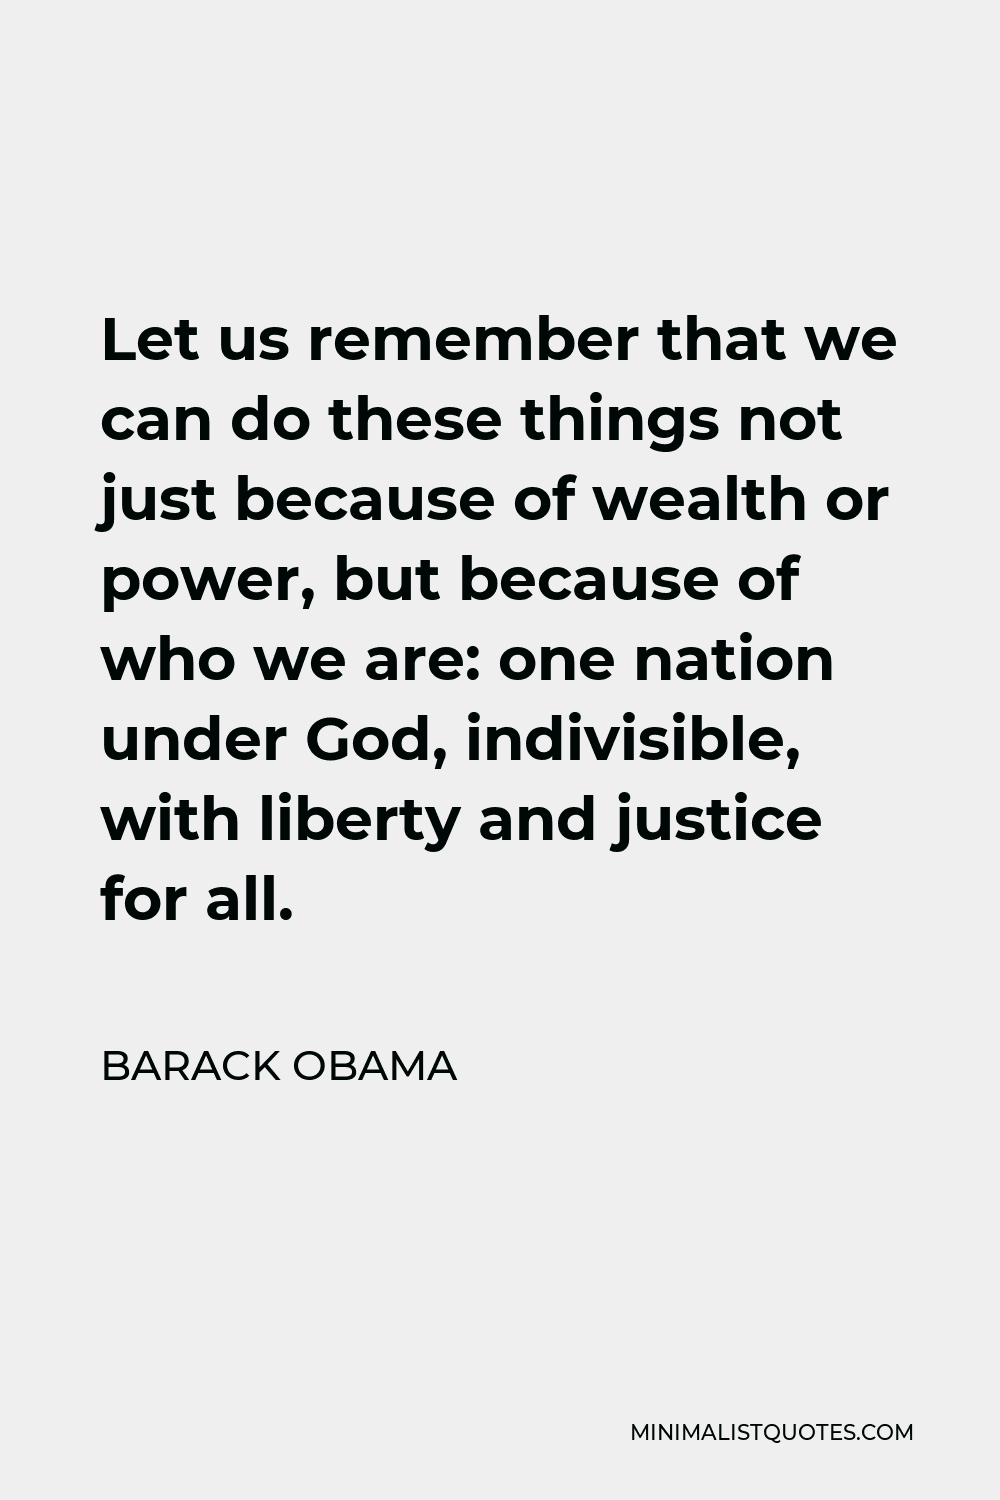 Barack Obama Quote - Let us remember that we can do these things not just because of wealth or power, but because of who we are: one nation under God, indivisible, with liberty and justice for all.